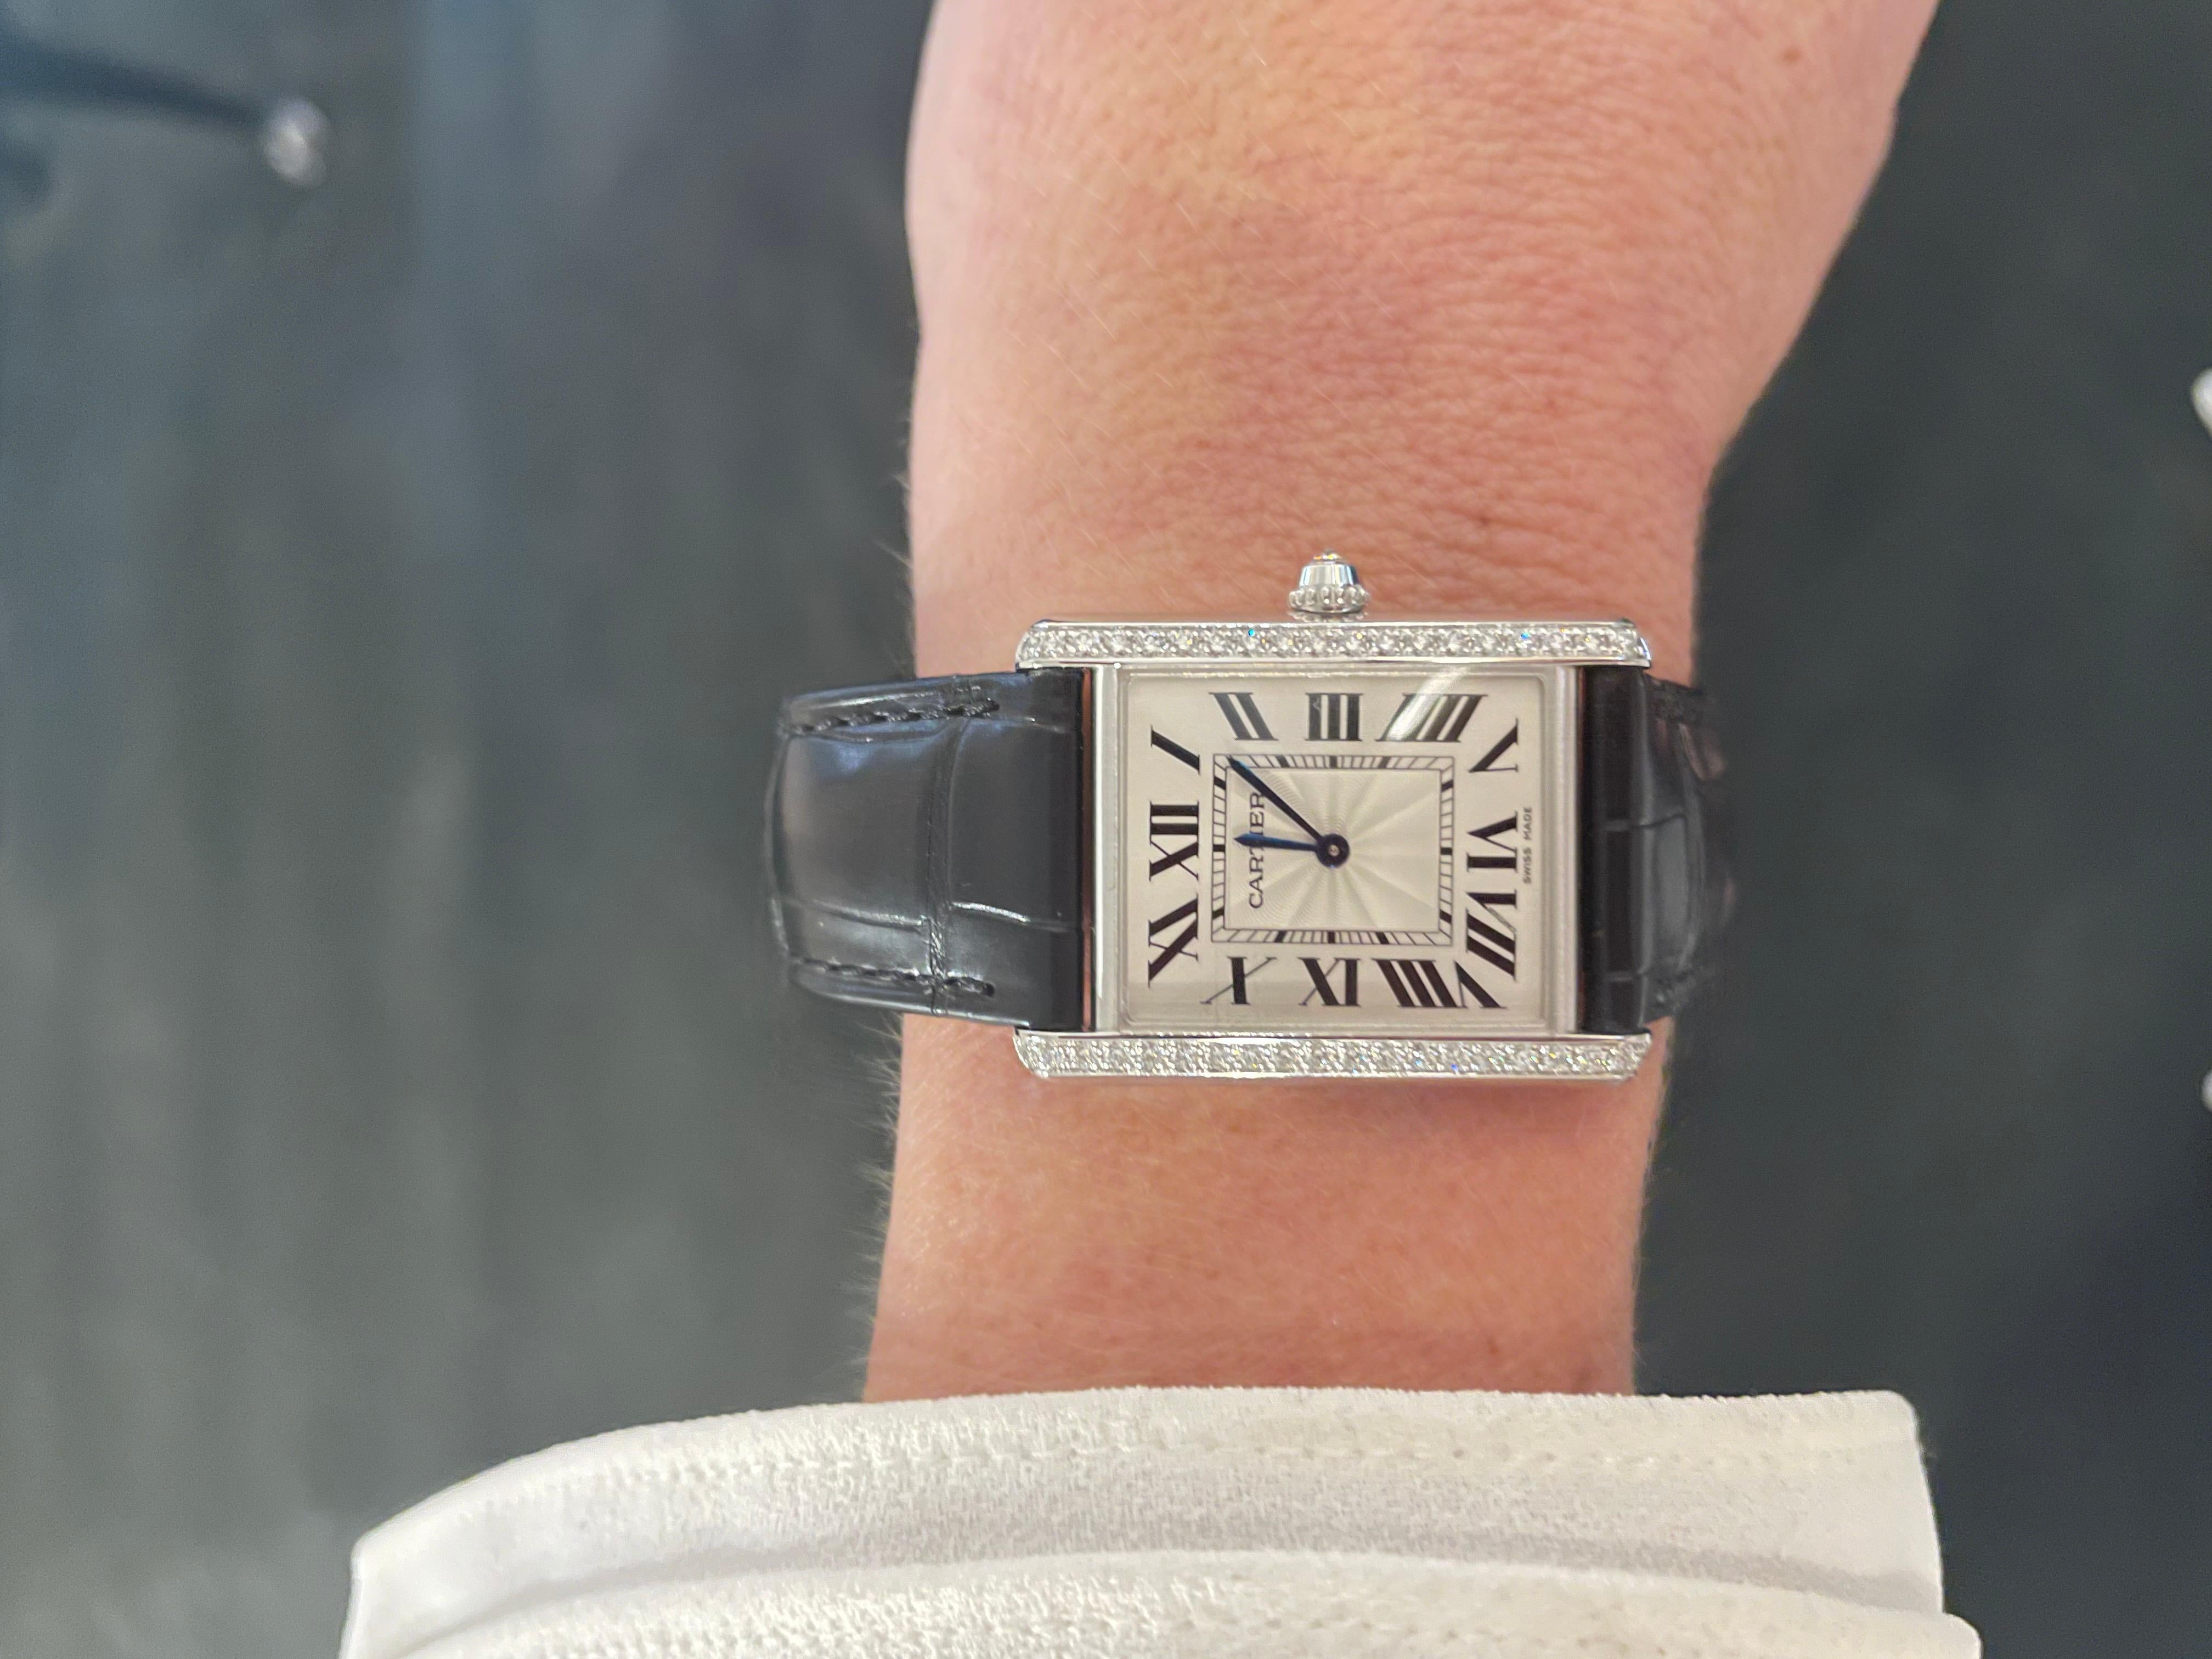 Classic Cartier known as the Tank Louis watch is stunning in 18kt white gold accented with 40 diamonds on the original black alligator watch band and comes with a pink alligator band as well.

This watch includes the original box and papers from